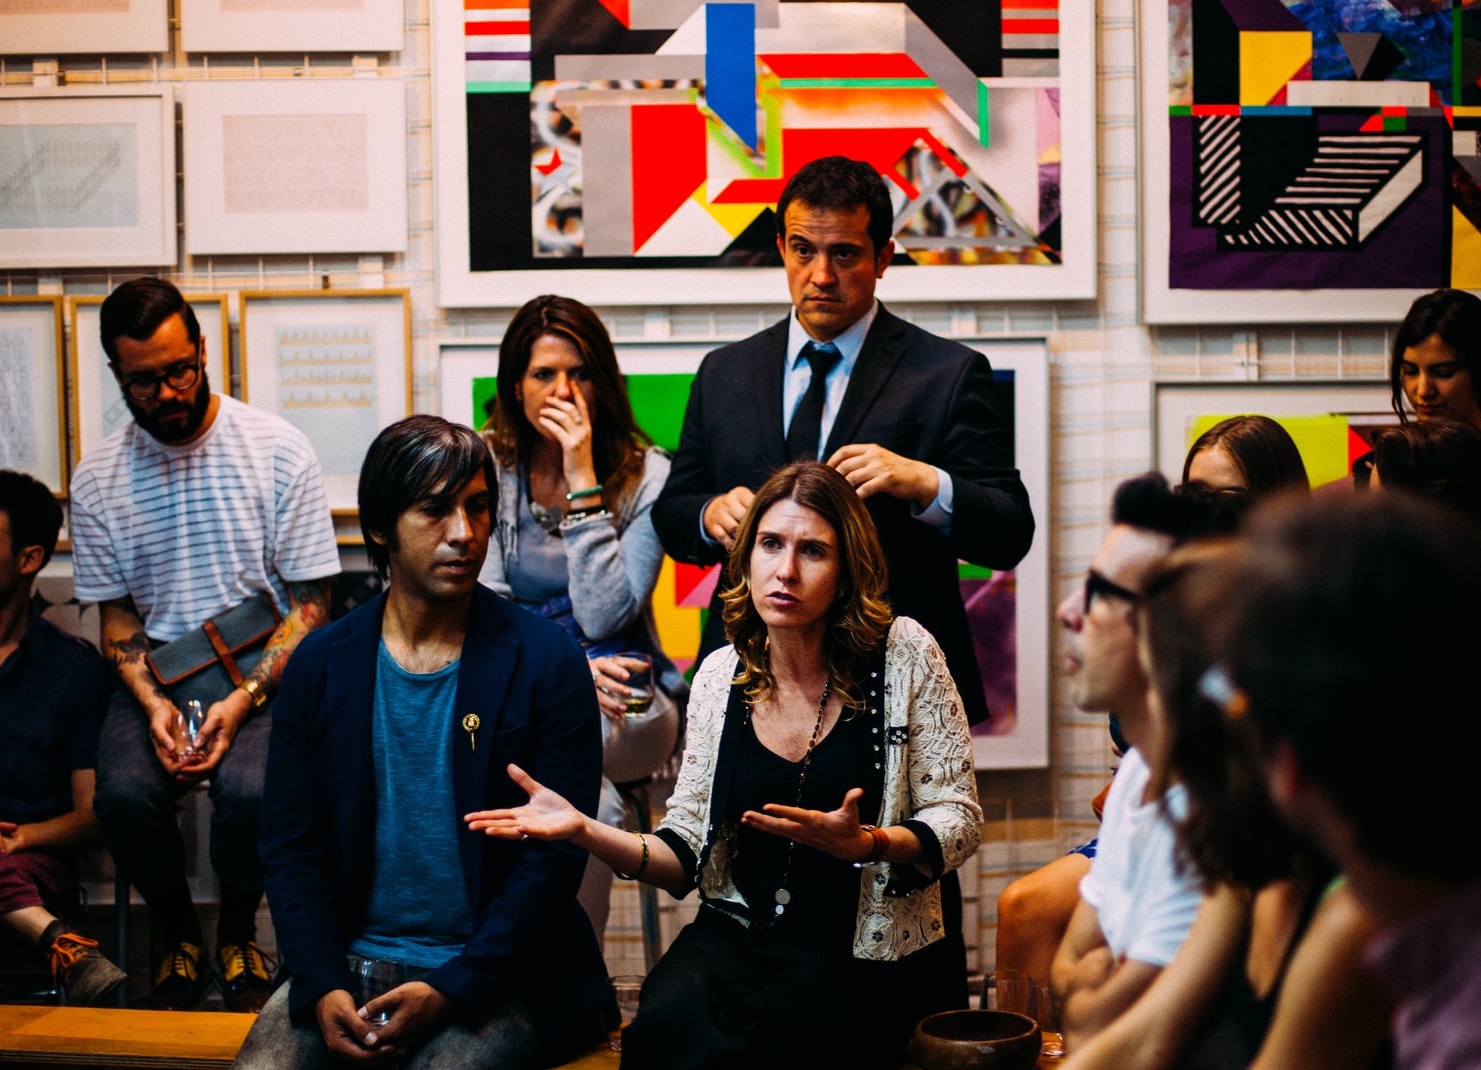 A person with long hair and gesturing with hands out appears to share a story in a room with a dozen other people in business casual attire and modern art on the wall behind them